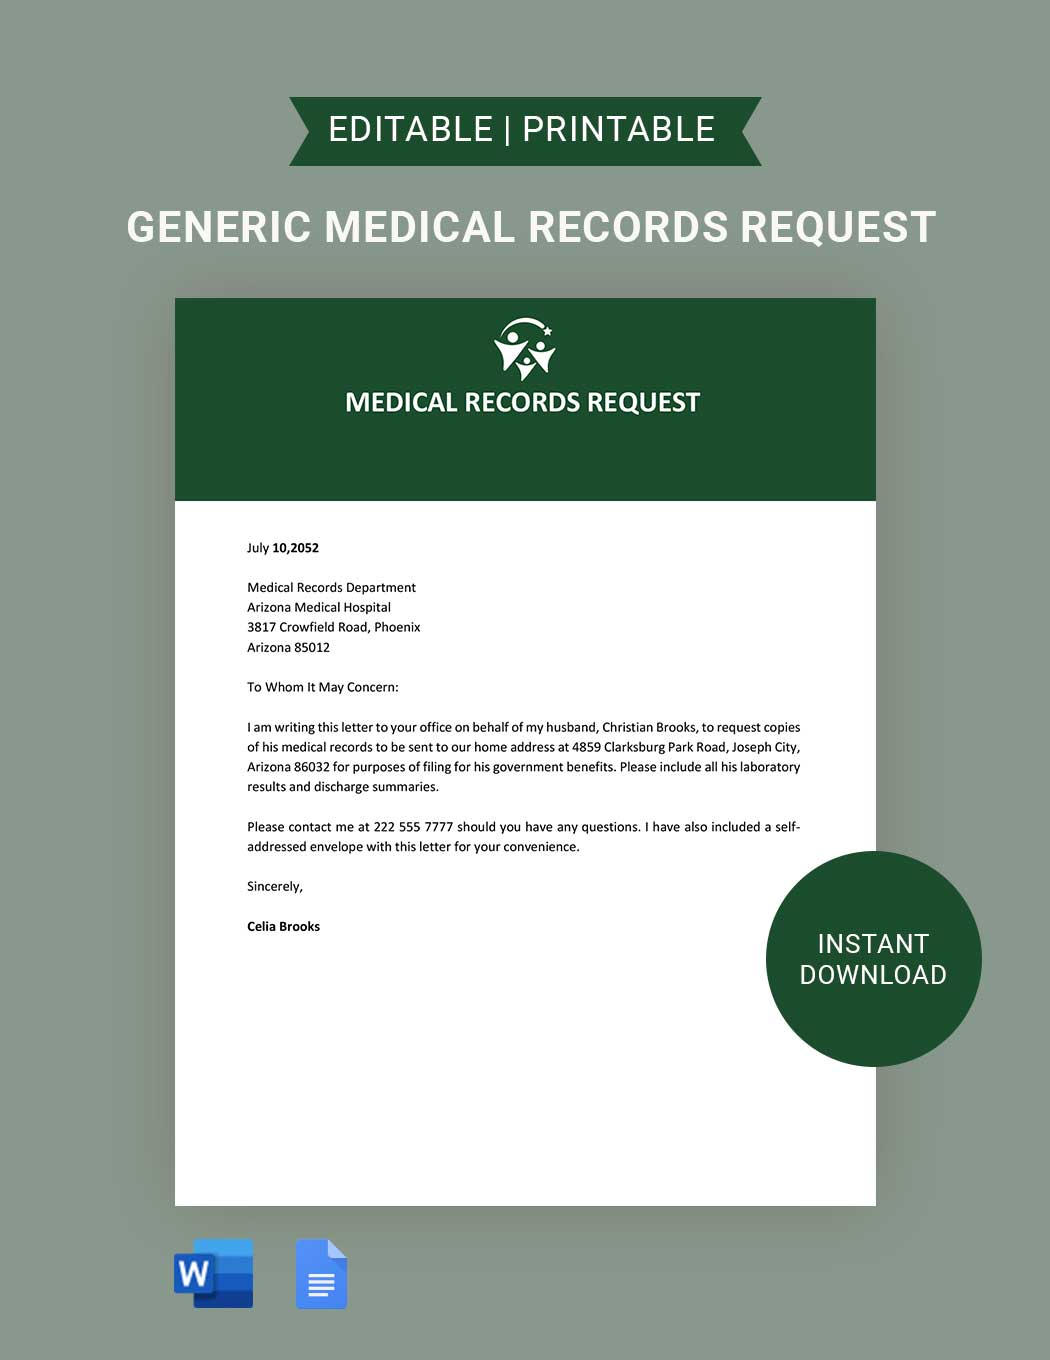 Generic Medical Records Request Example in Word, Google Docs